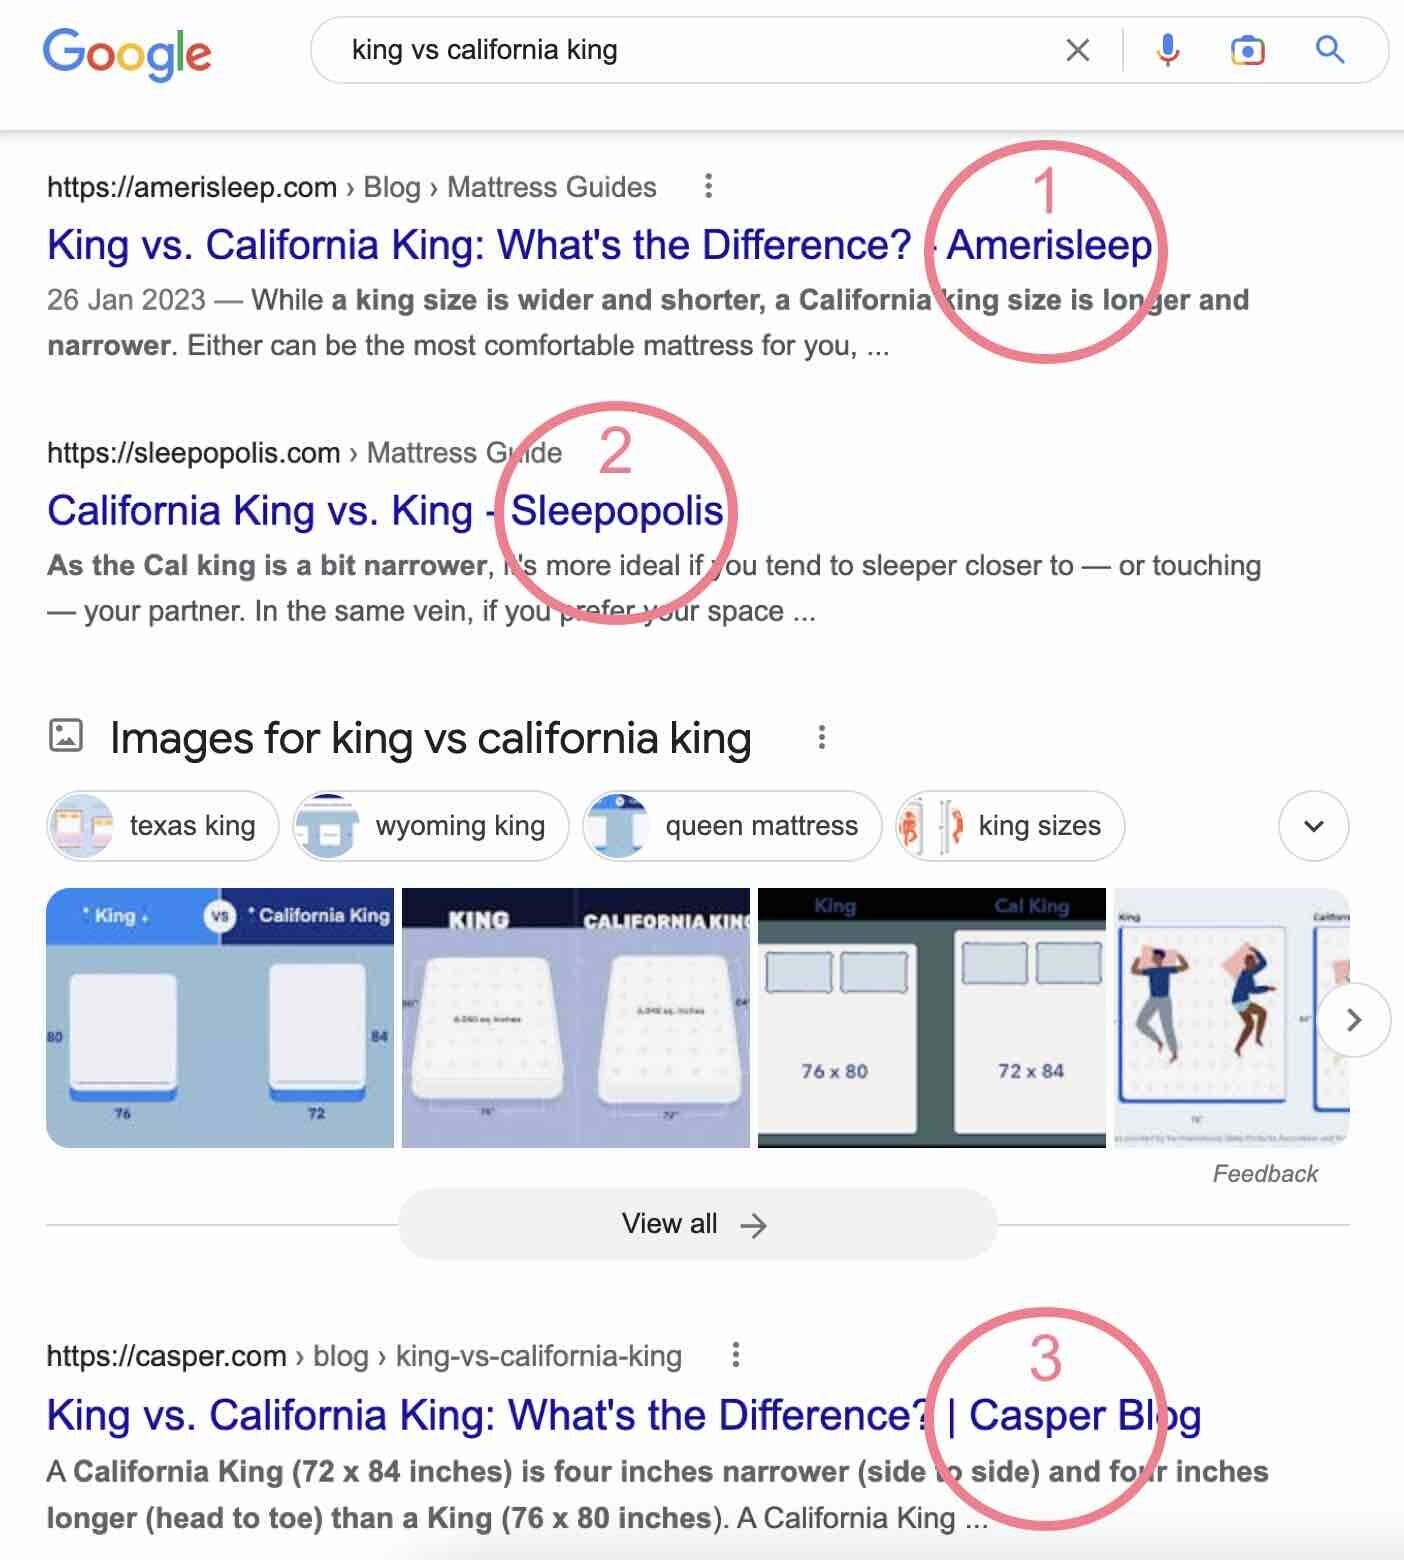 analyzing SERP to understand what prospects want